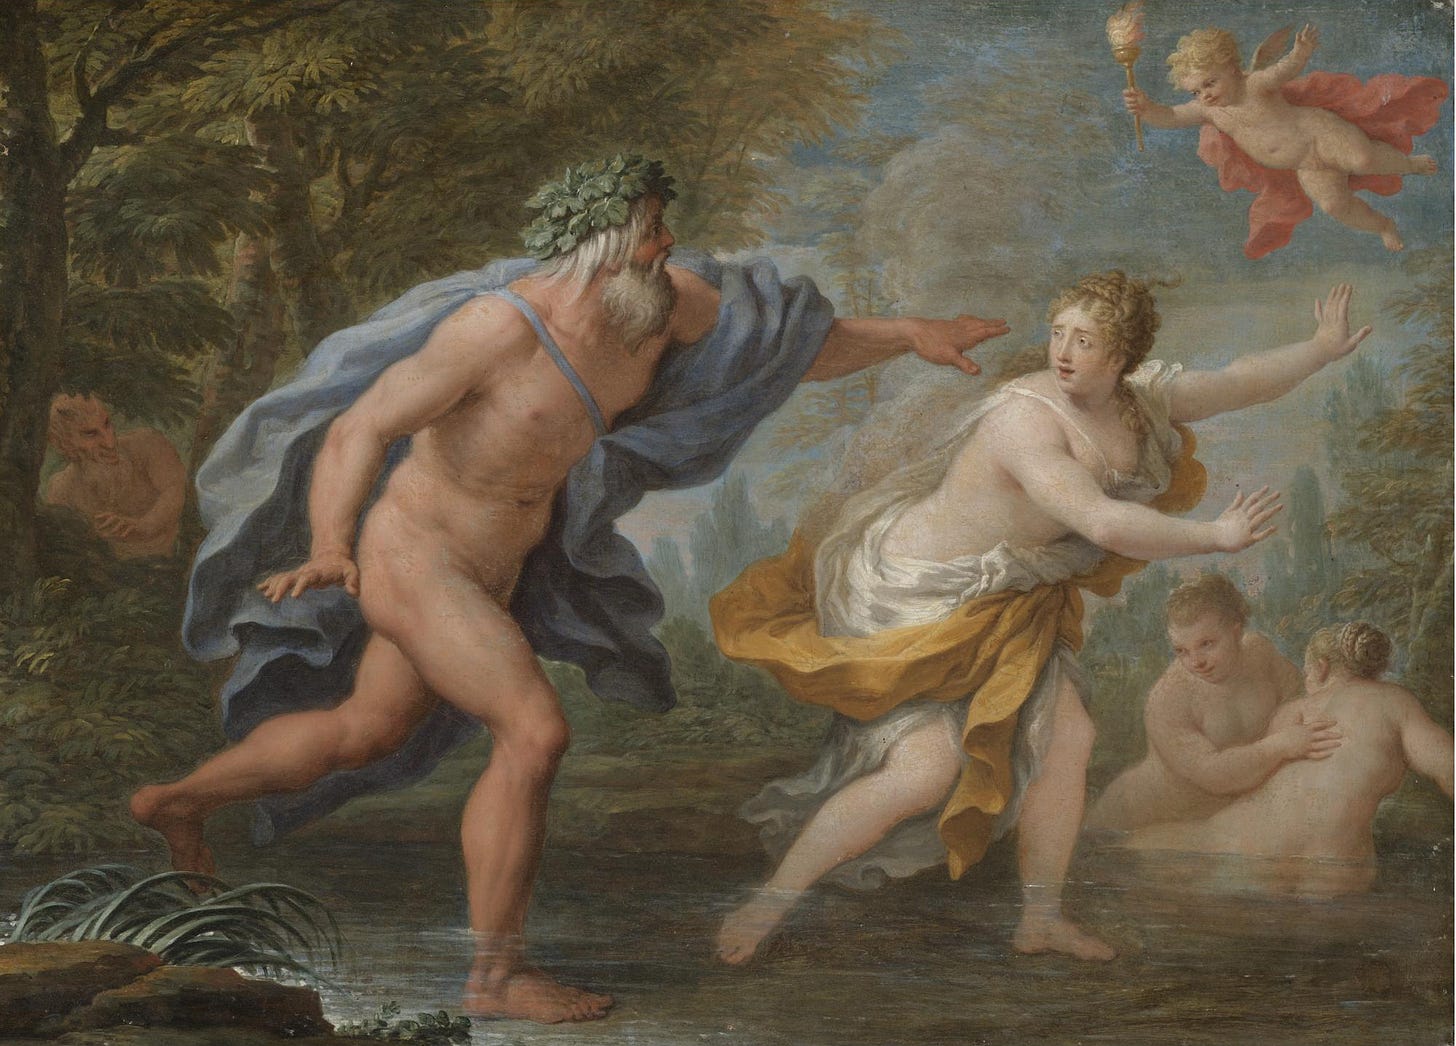 A naked old man crowned with a wreath chases a woman in a toga, both are standing in ankle-deep water. The devil looks on from the distance and two other nude women are bathing in the water in the background